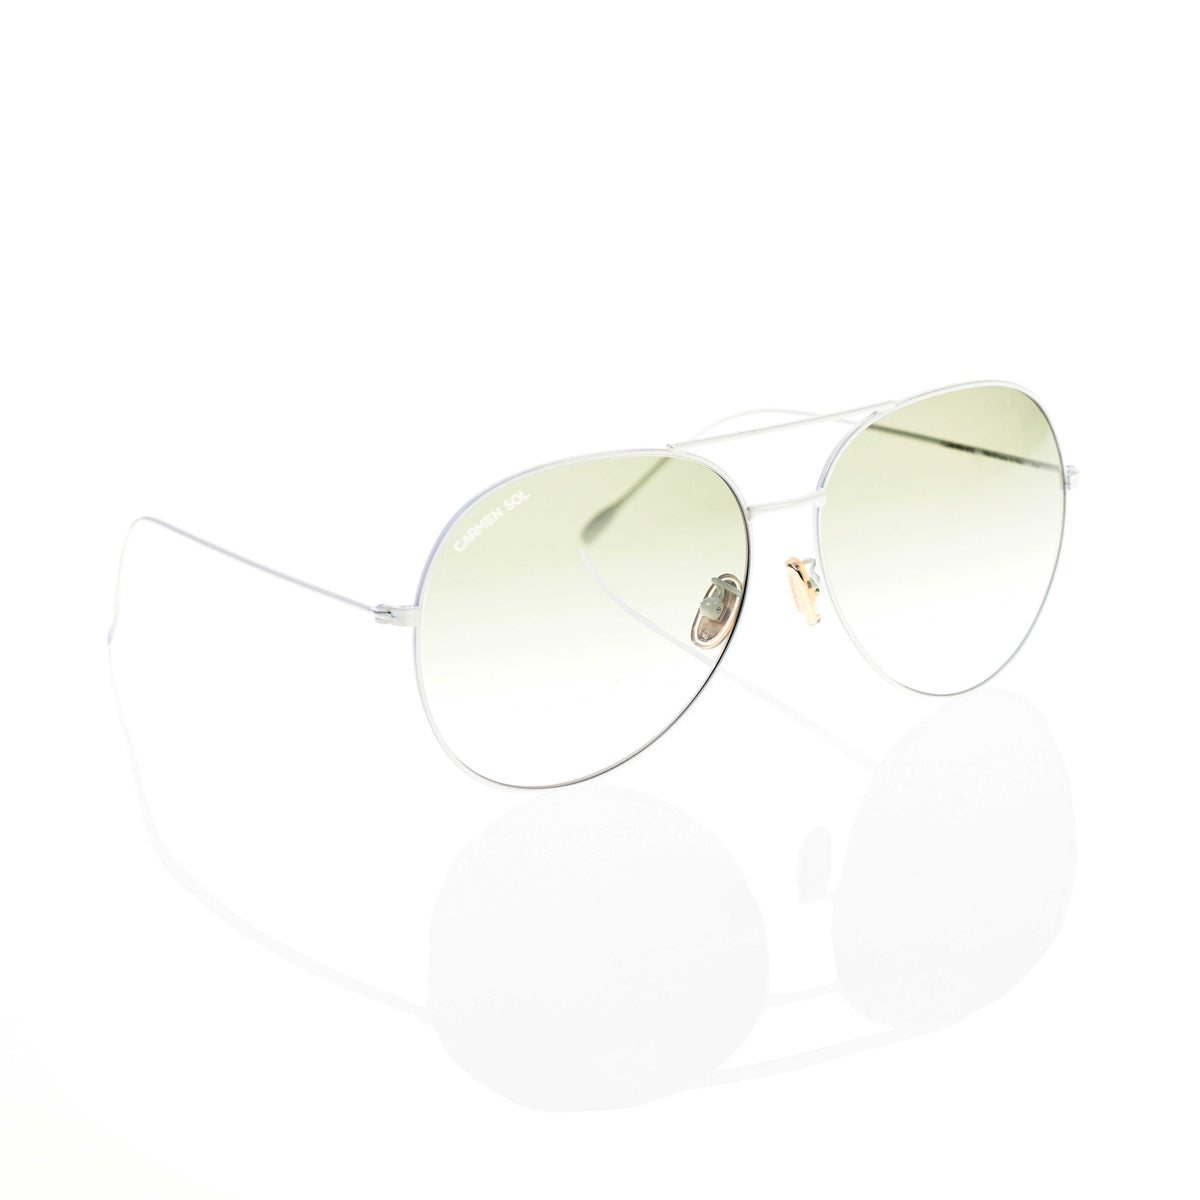 White aviator frame best for summer with gradient yellow glasses